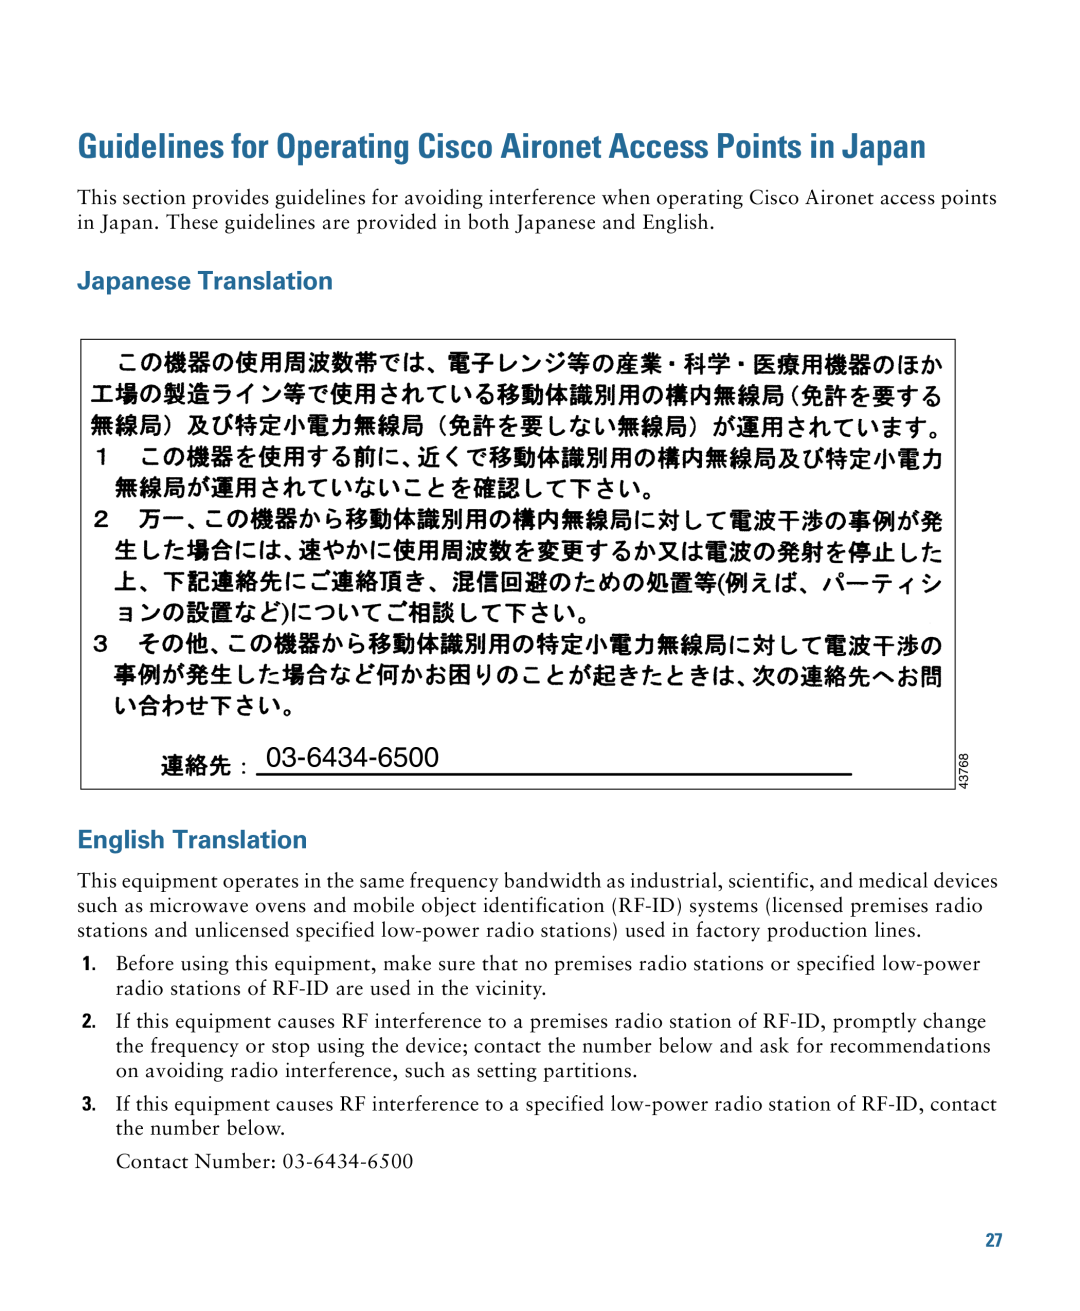 Cisco Systems 1140 Guidelines for Operating Cisco Aironet Access Points in Japan, Japanese Translation, 03-6434-6500 